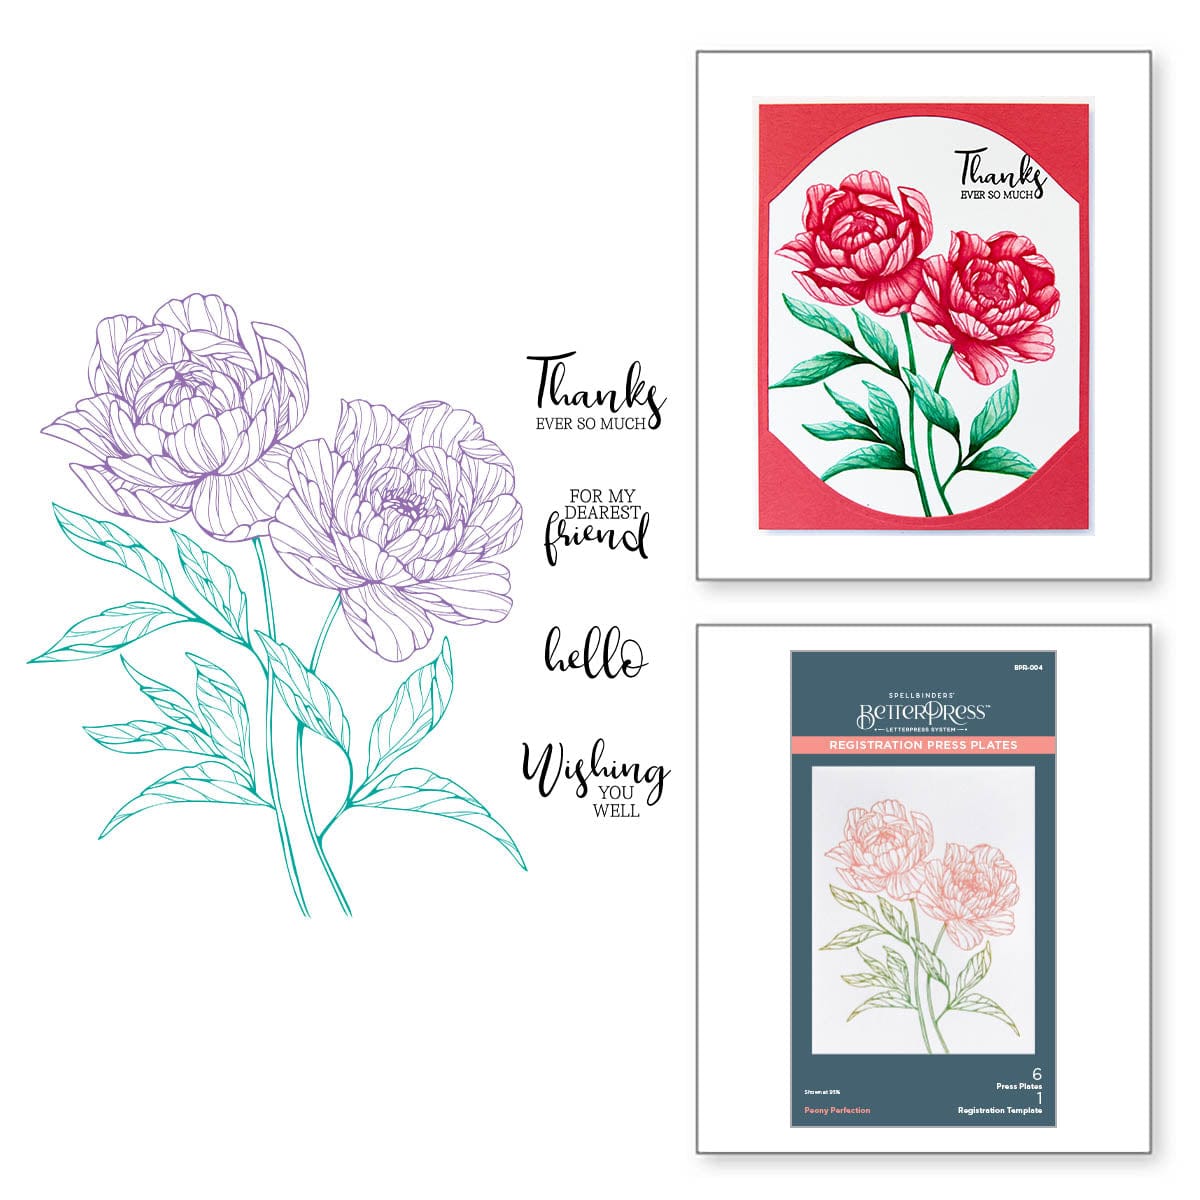 Peony Perfection Registration Press Plates from the Cheers to You CollectionSpellbinders Paper Arts